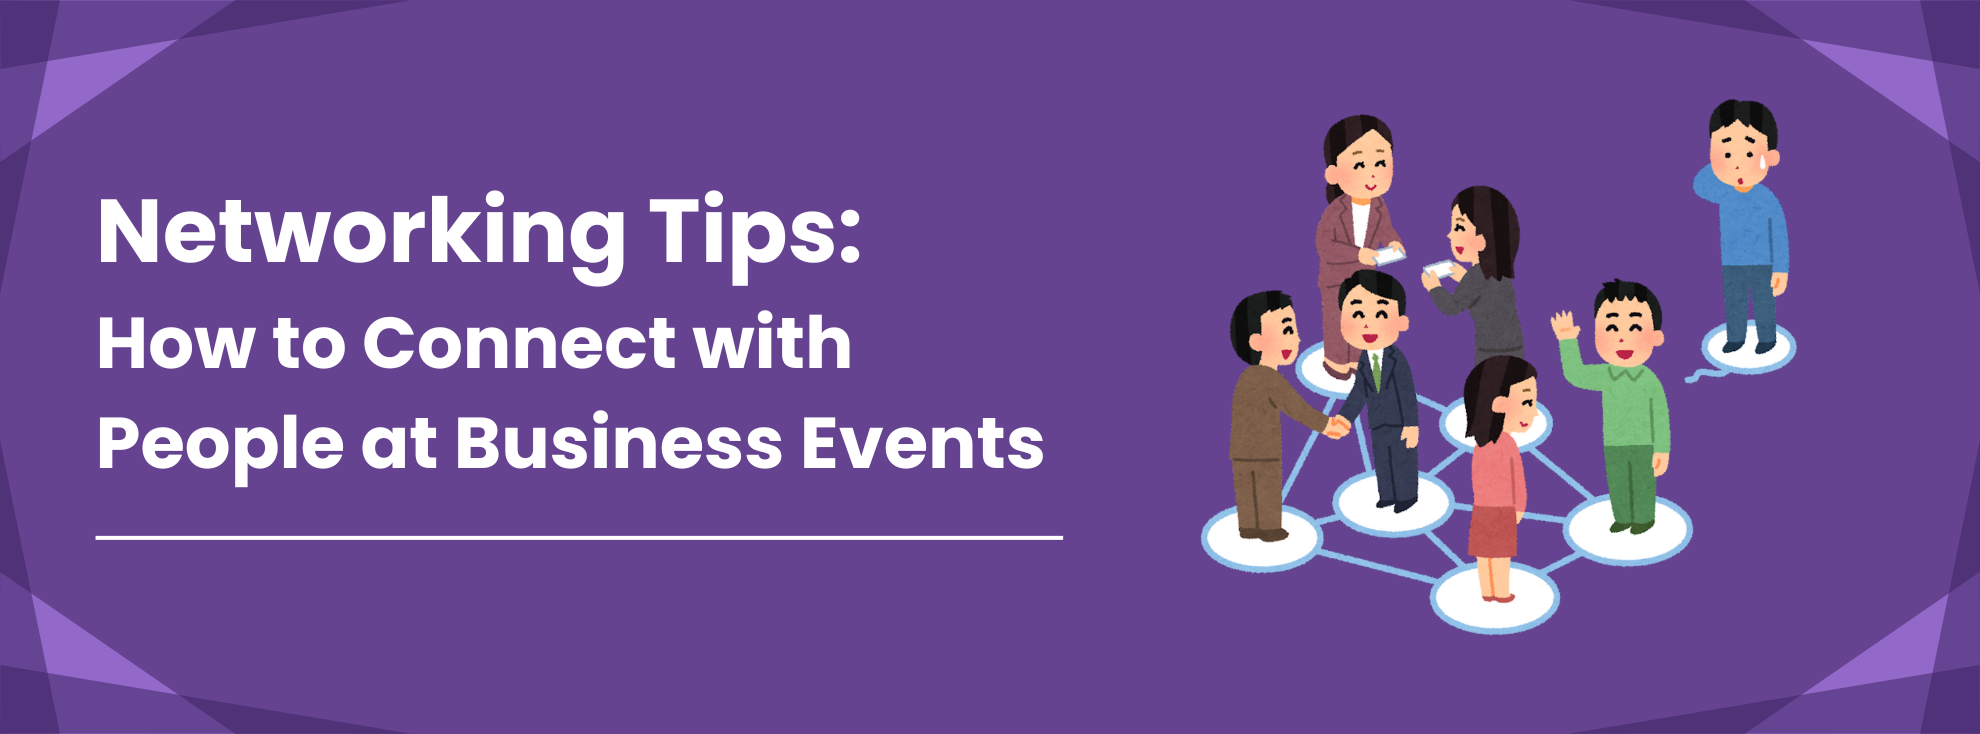 How to connect with people at business events - Featured Image